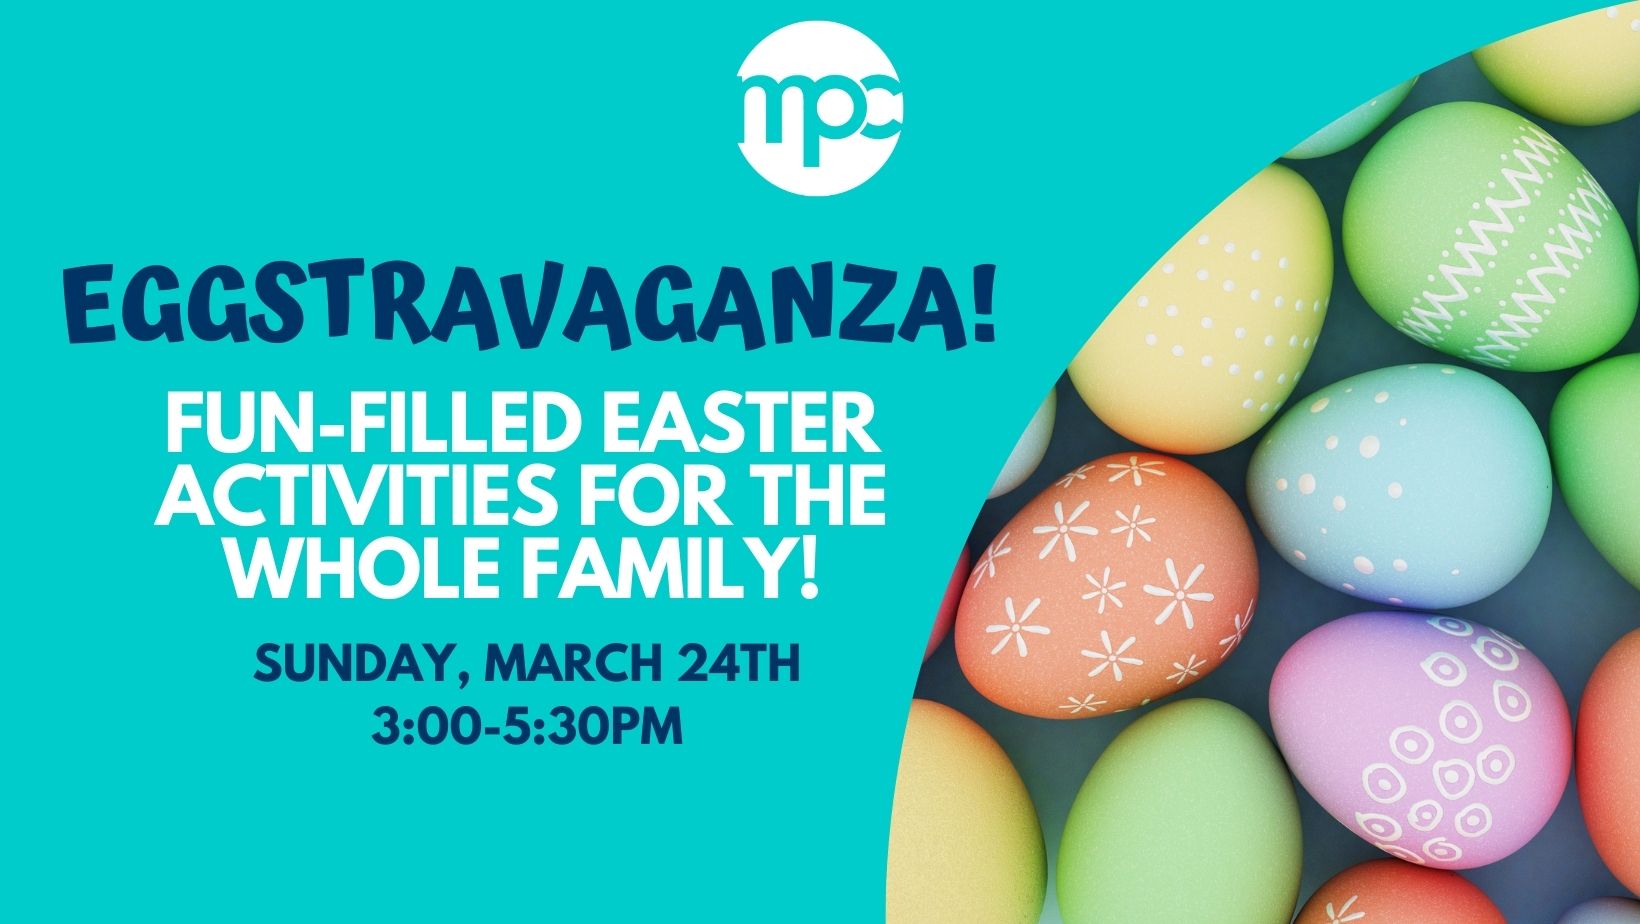 Eggstravaganza at MPC
Join us for an afternoon of Easter Family Fun!
